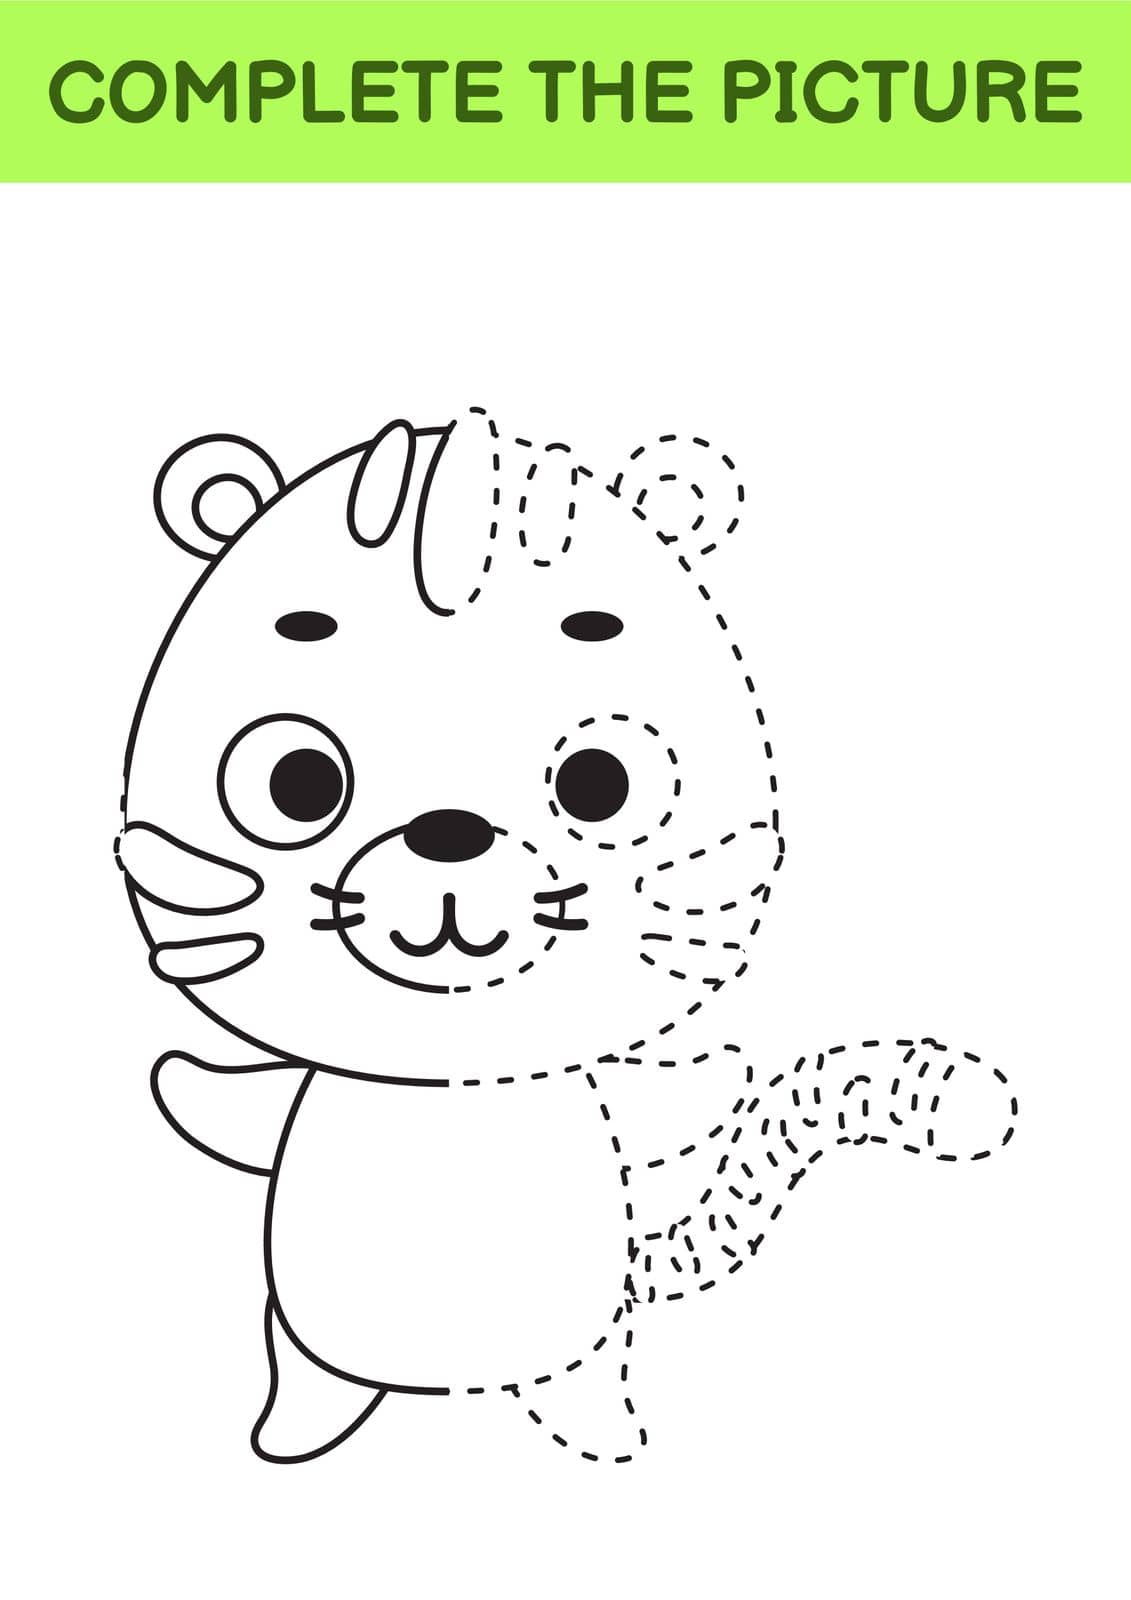 Complete drawn picture of cute tiger. Coloring book. Dot copy game. Handwriting practice, drawing skills training. Education developing printable worksheet. Activity page. Vector illustration by Melnyk